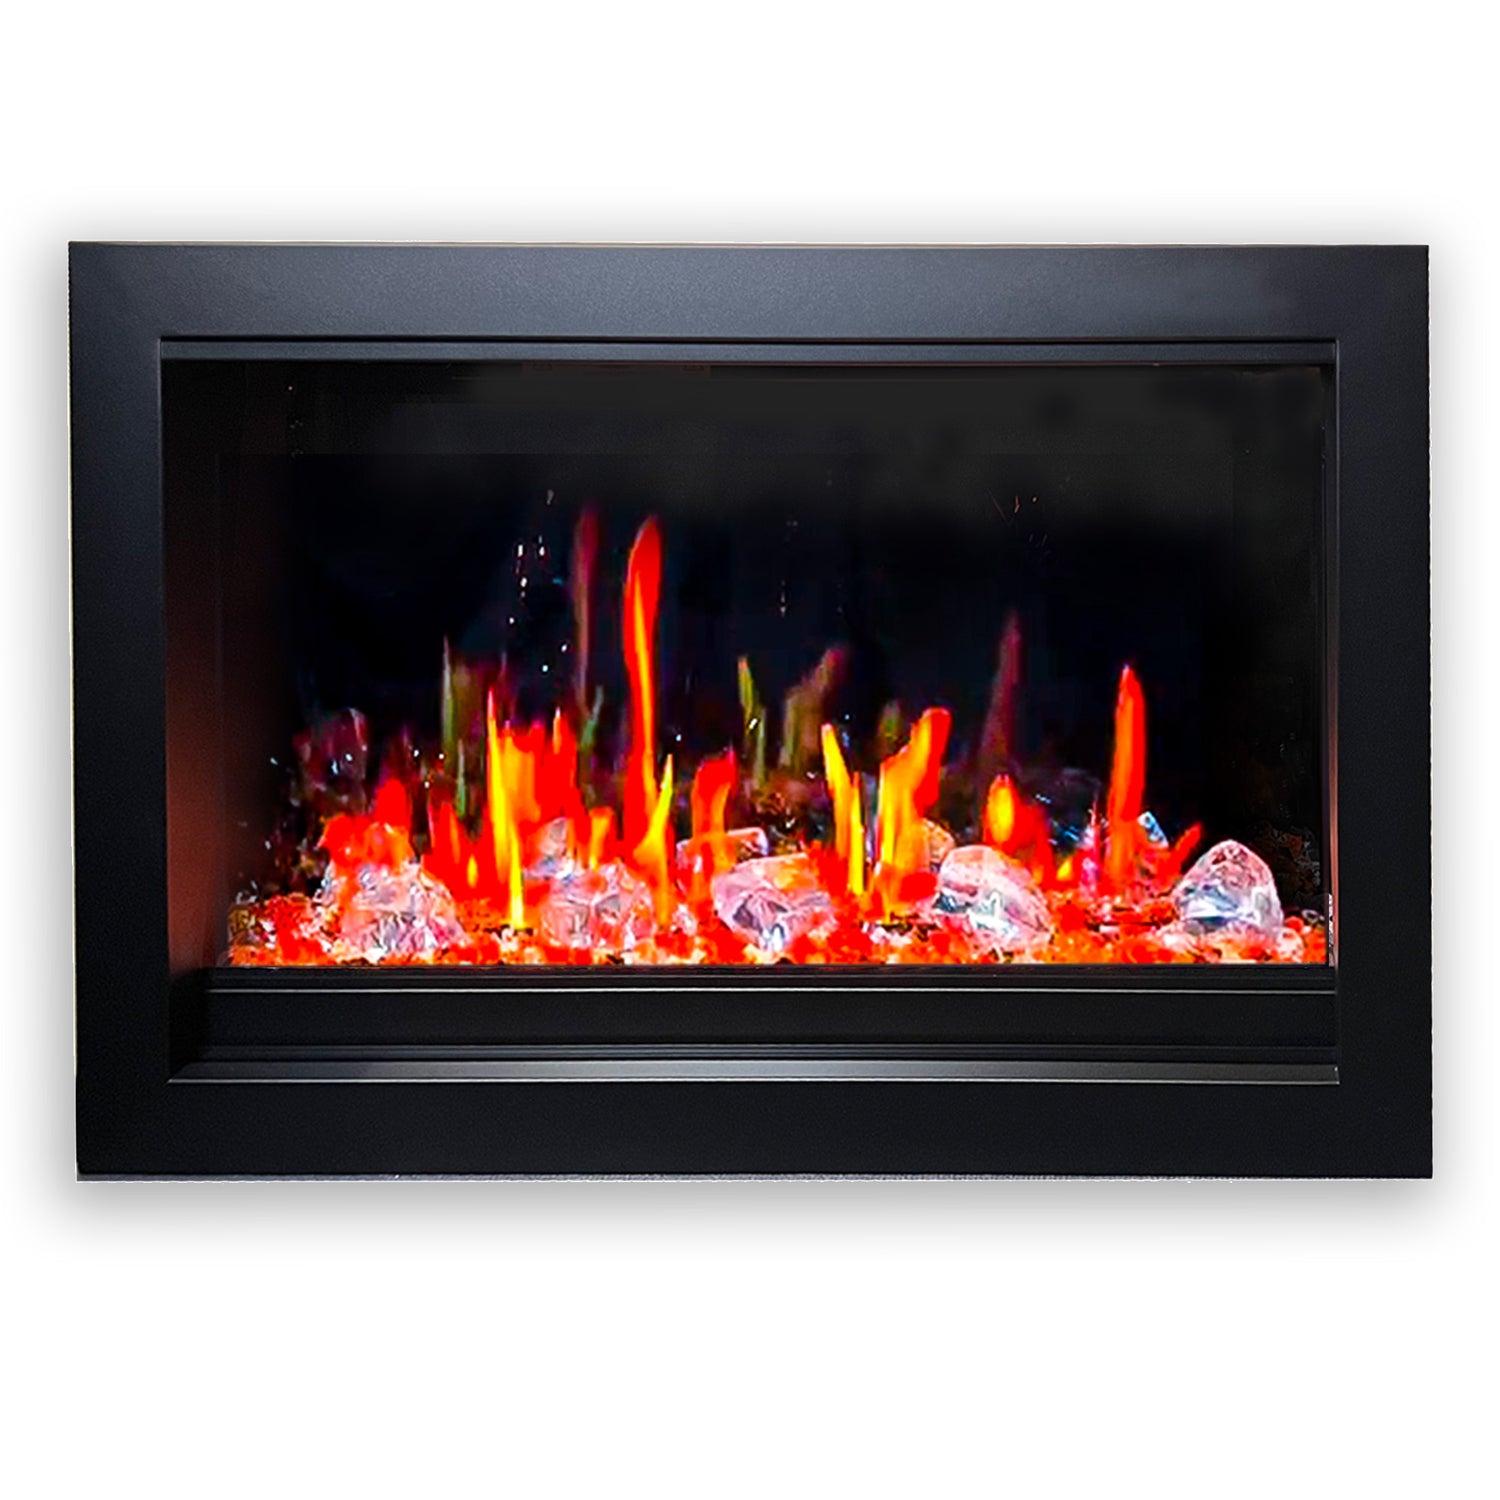 zopaflame fireplace insert 30inch 